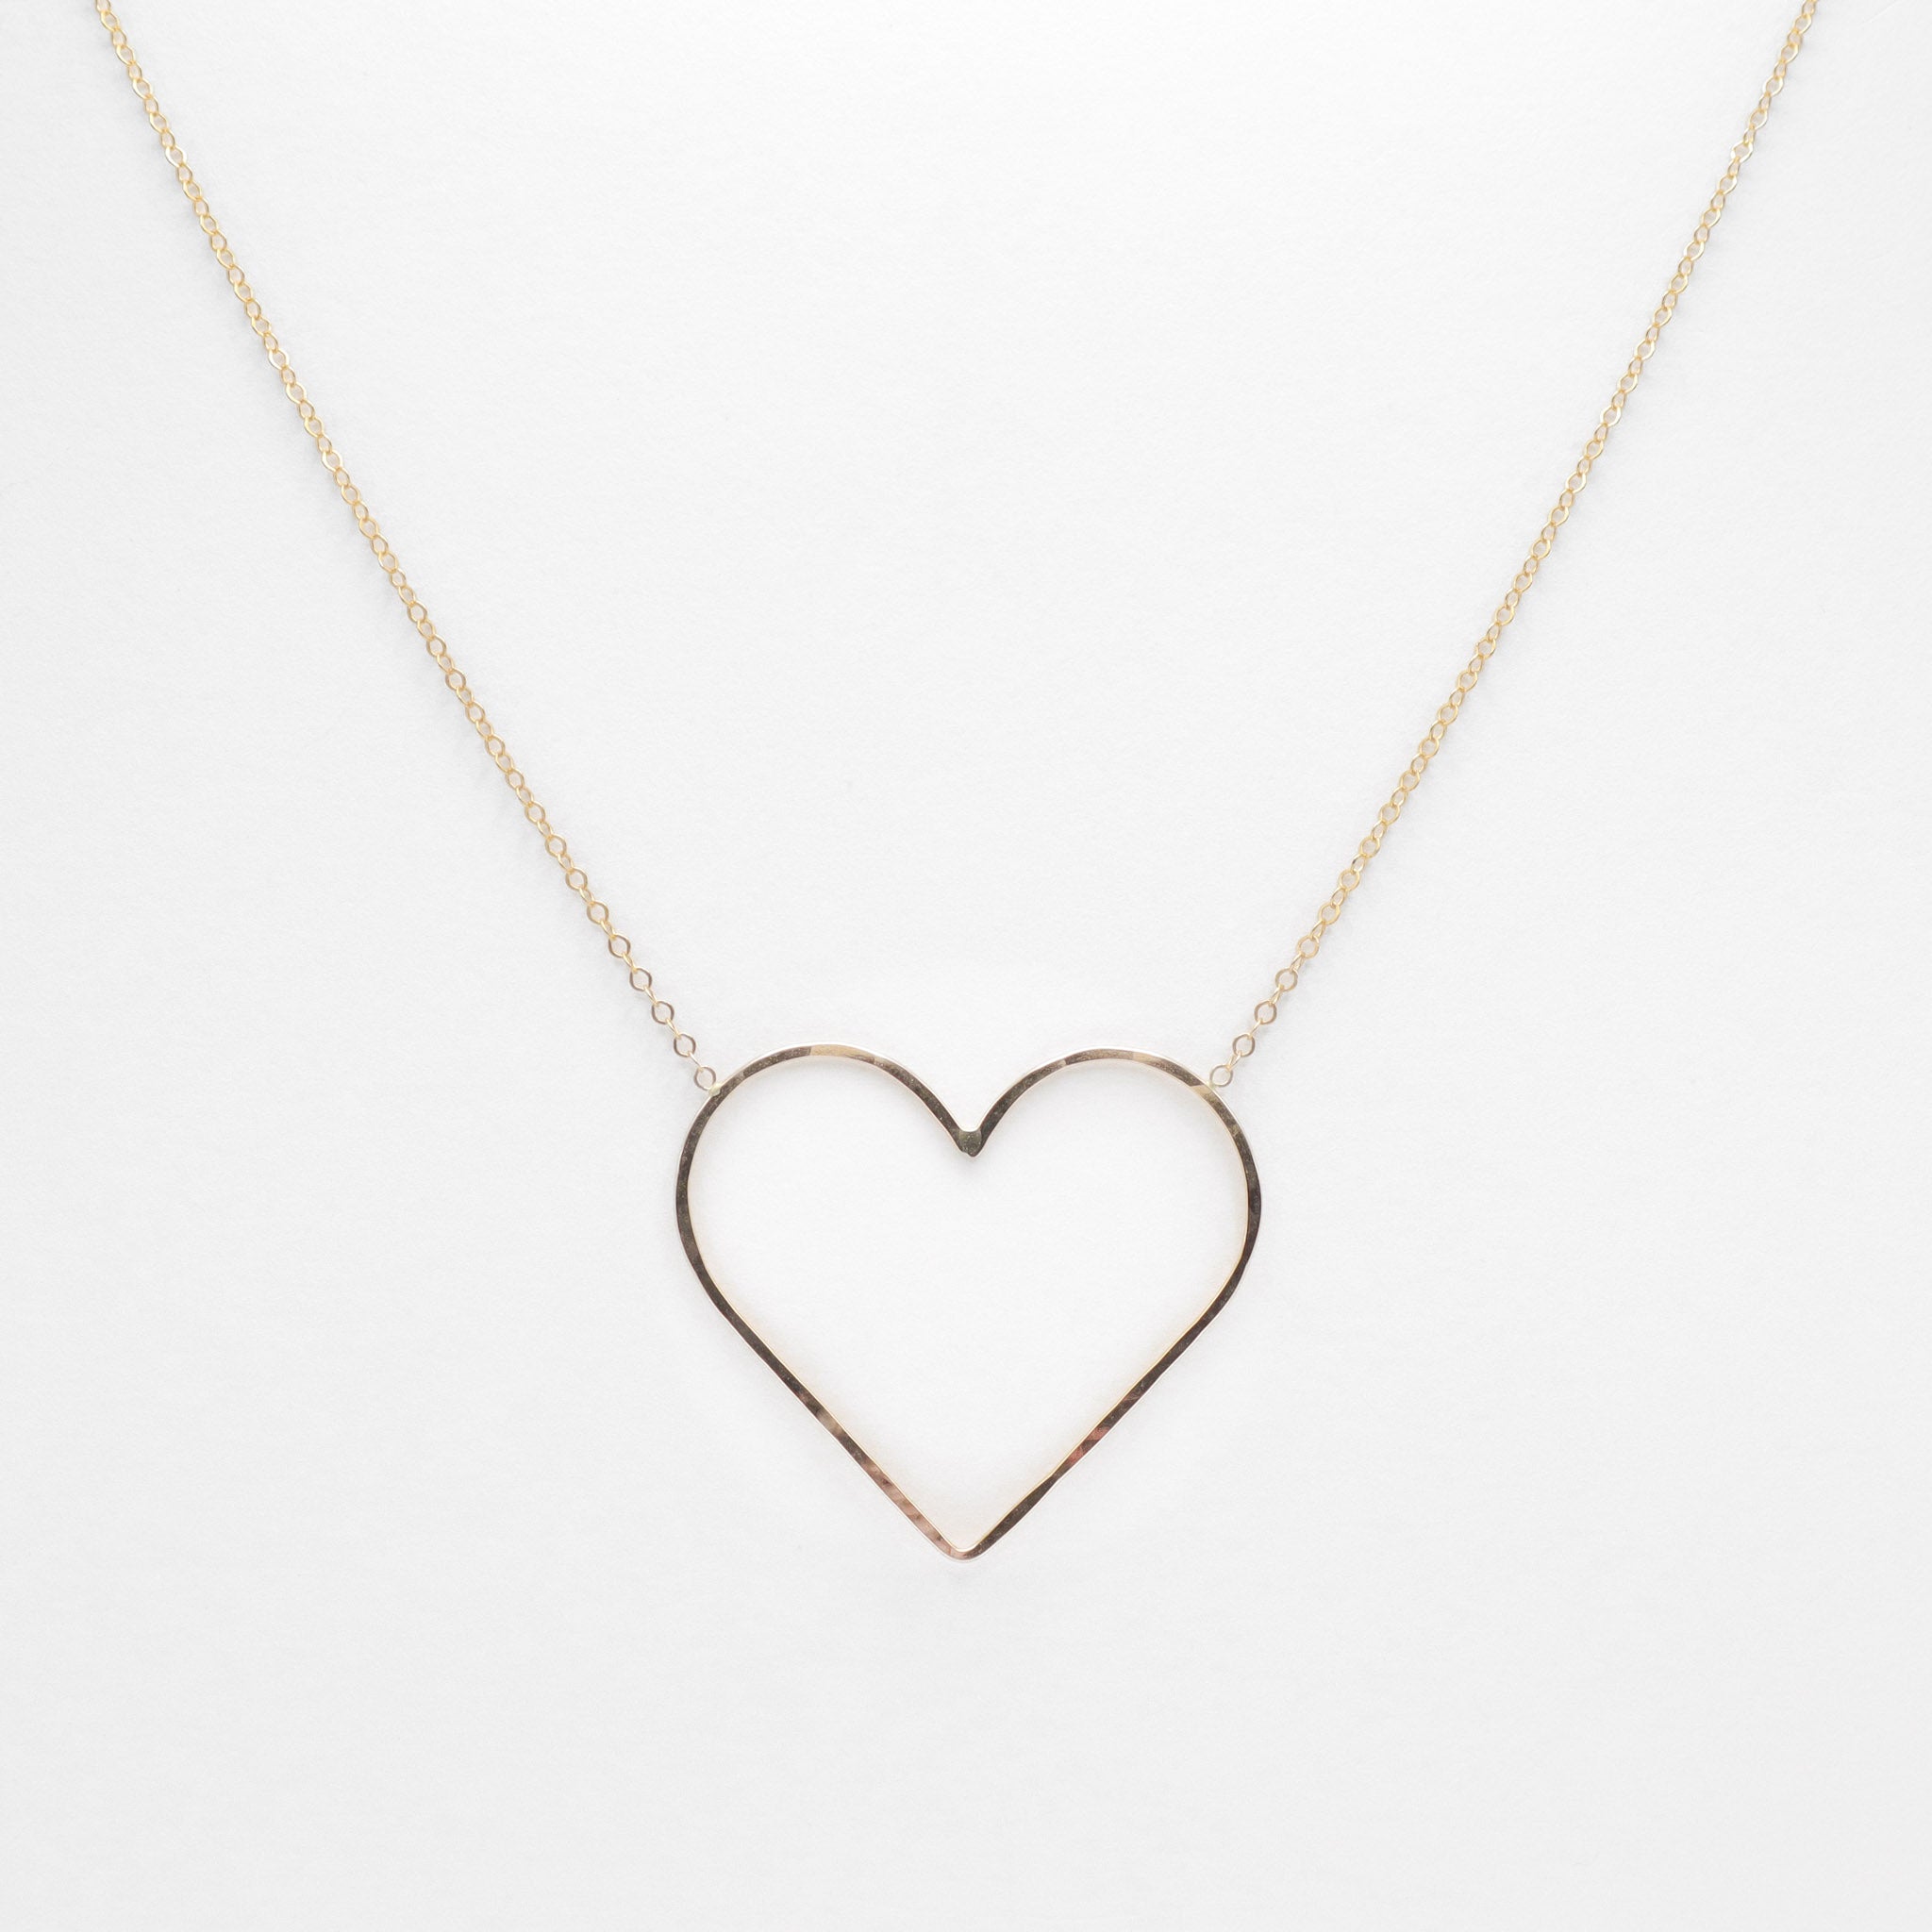 Petite Heart of Gold Necklace, featured image